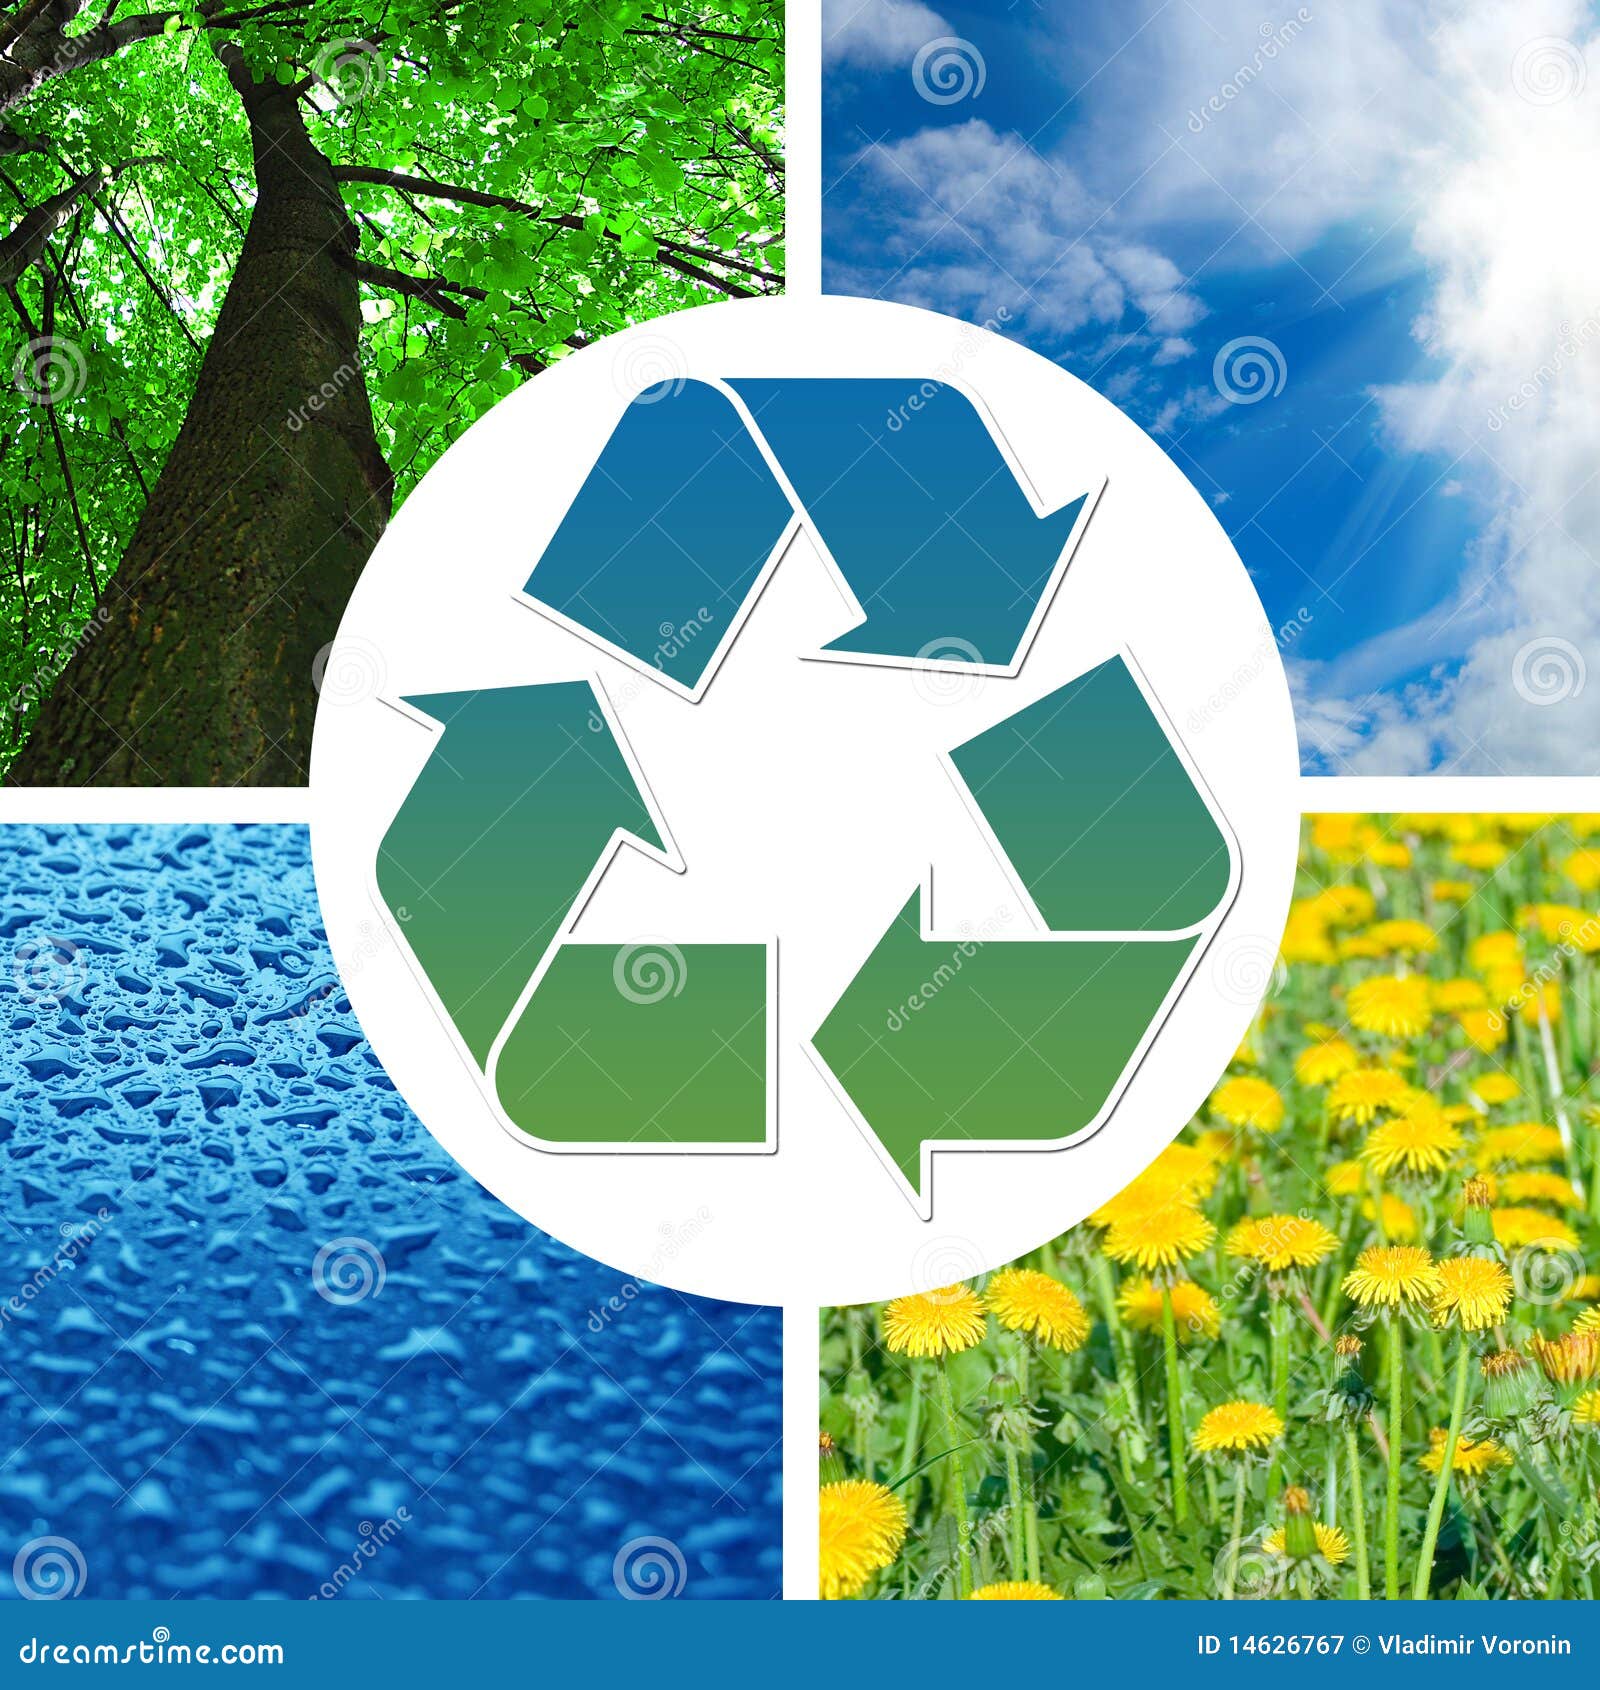 conceptual recycling sign with images of nature